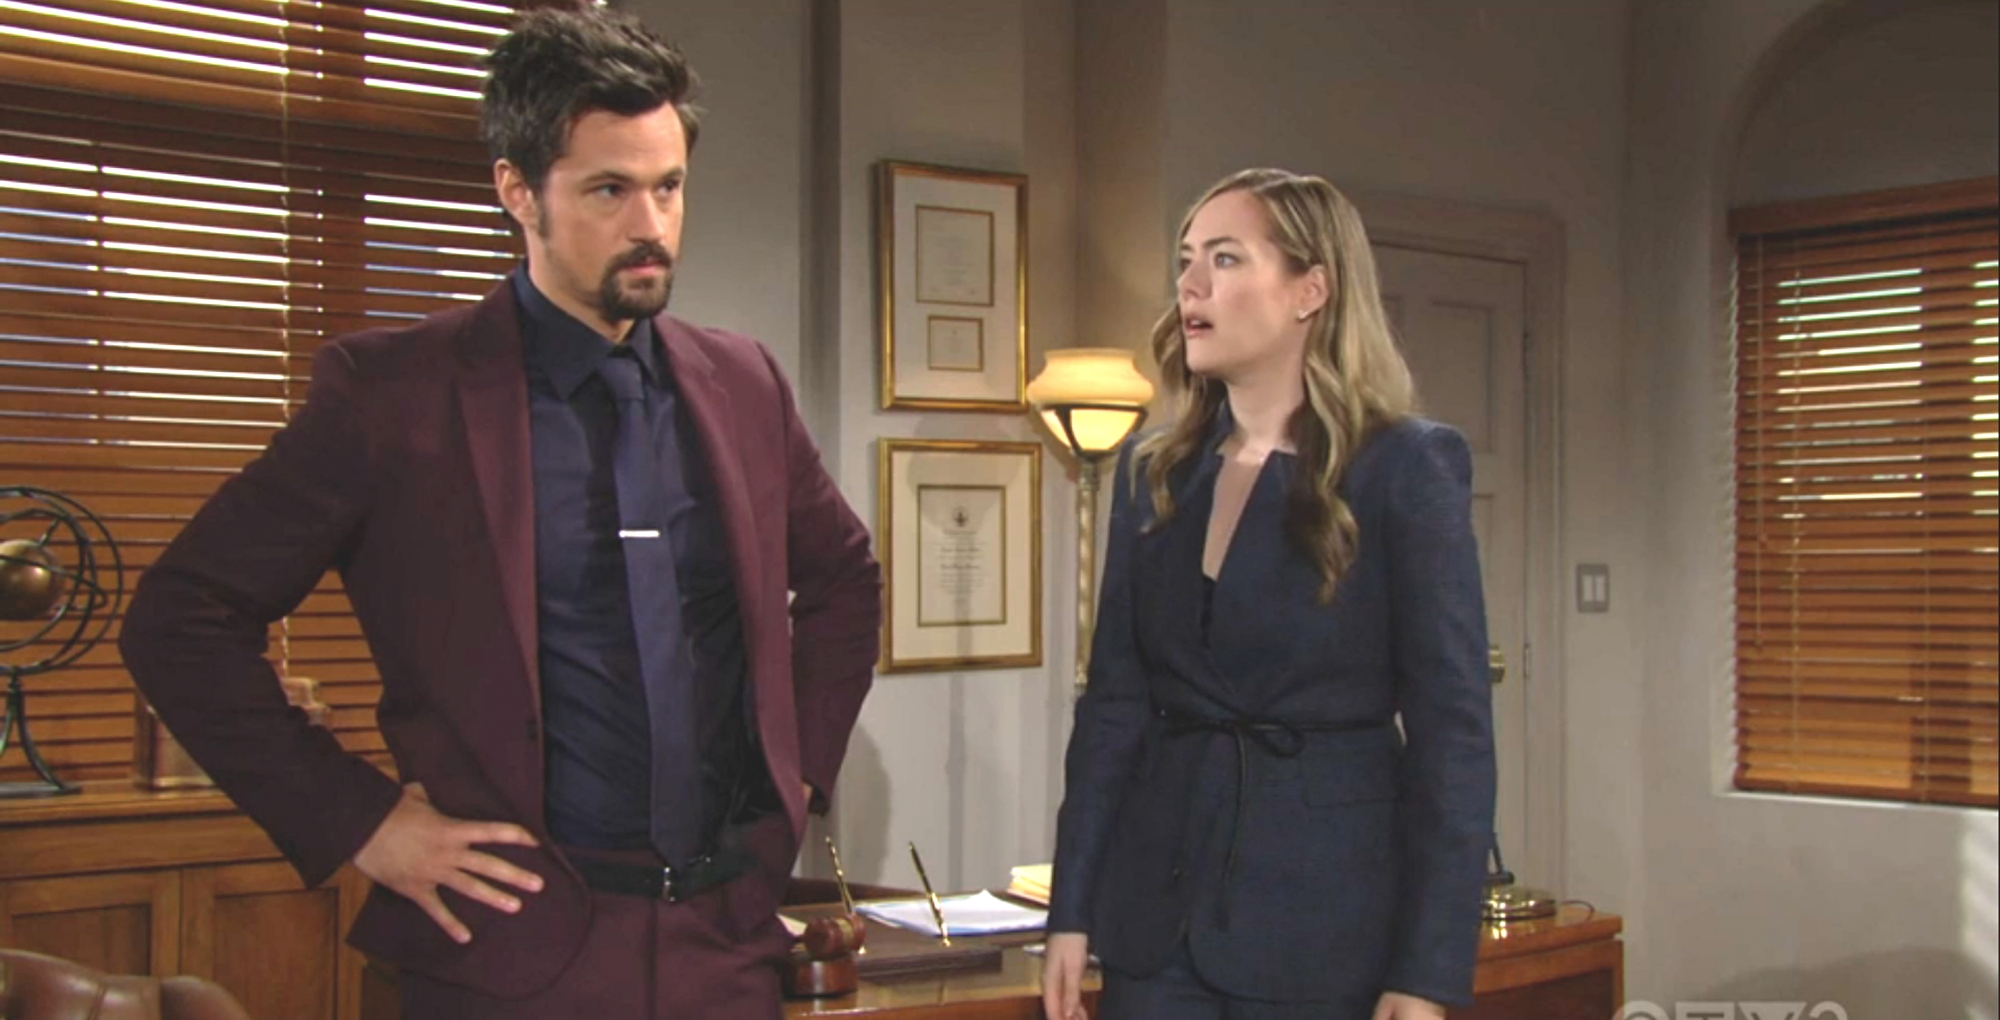 the bold and the beautiful recap for monday, february 13, 2023 thomas forrester and hope logan huff in indignation